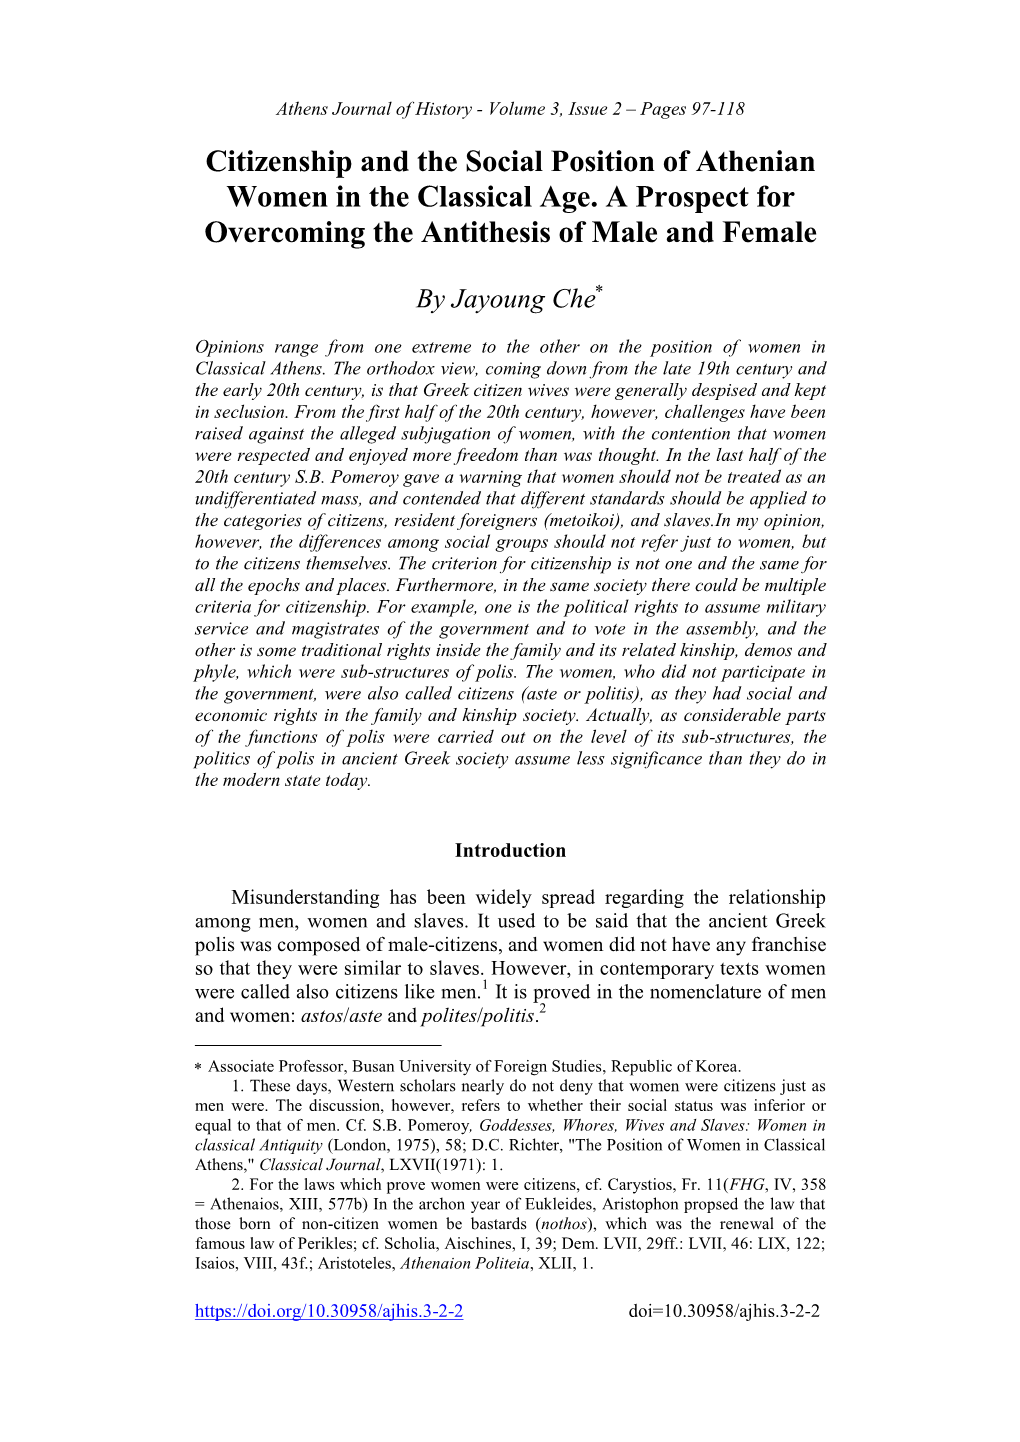 Citizenship and the Social Position of Athenian Women in the Classical Age